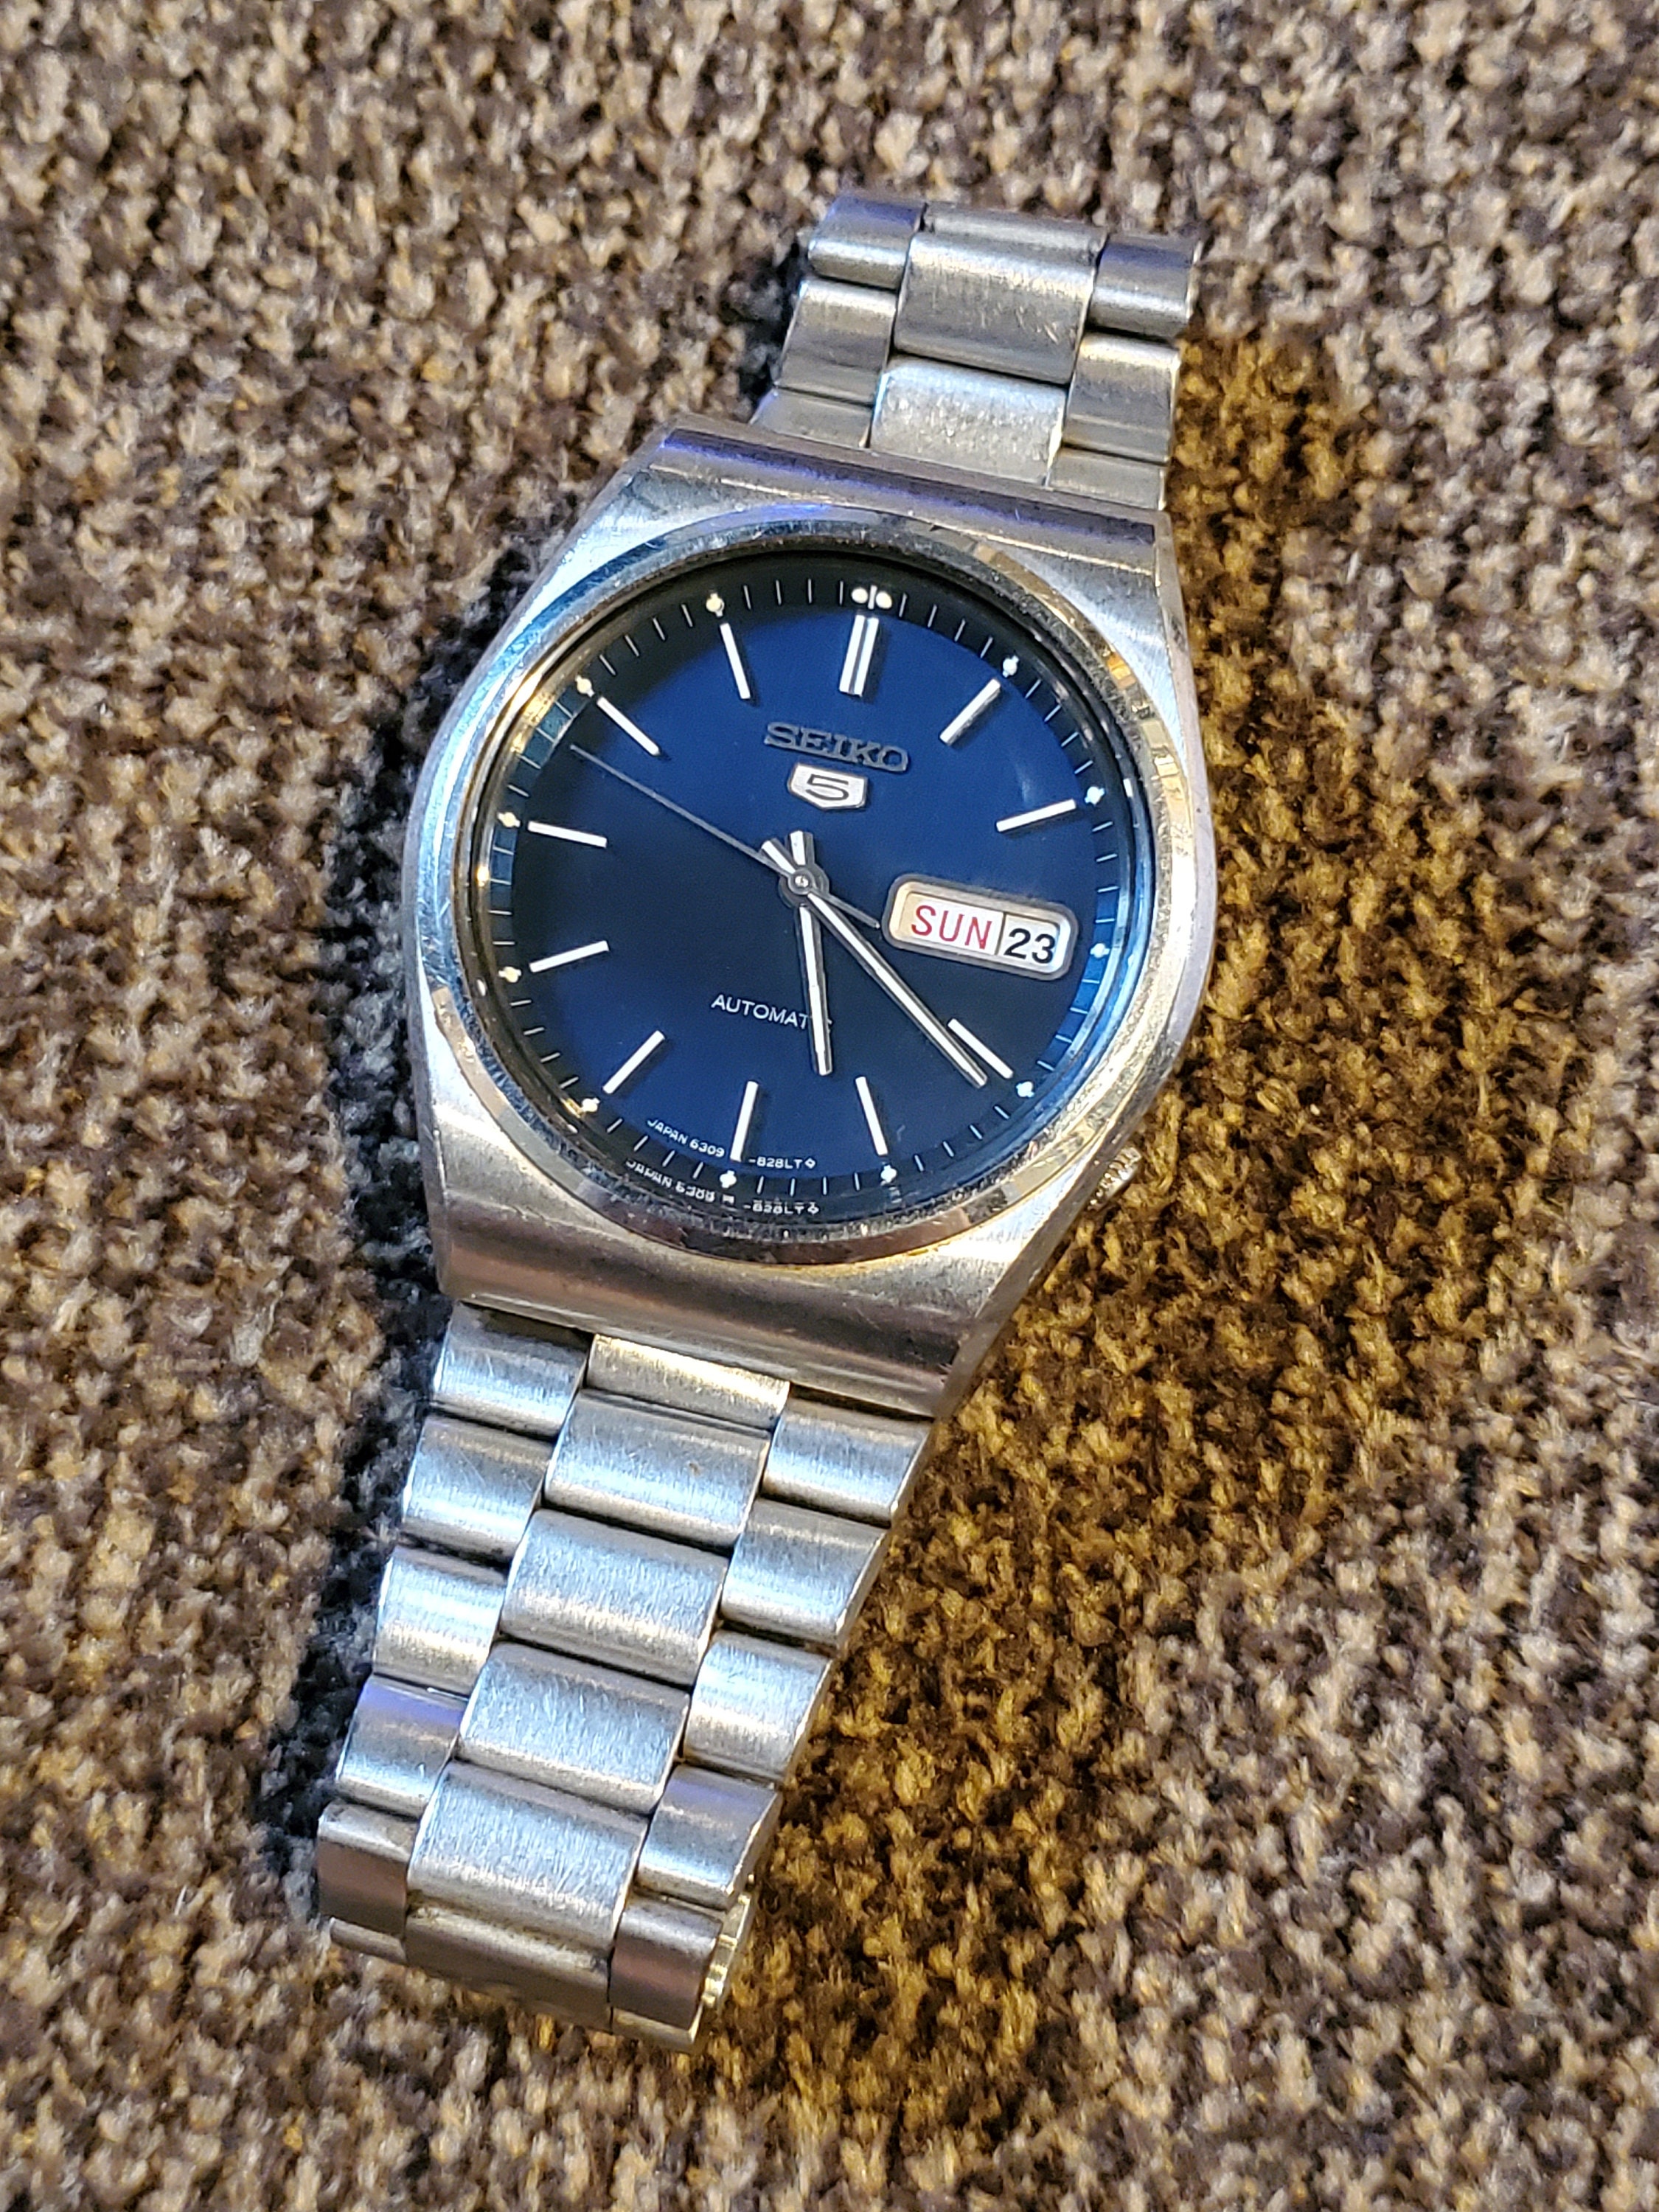 Vintage Seiko S5 Automatic Watch - Etsy Finland